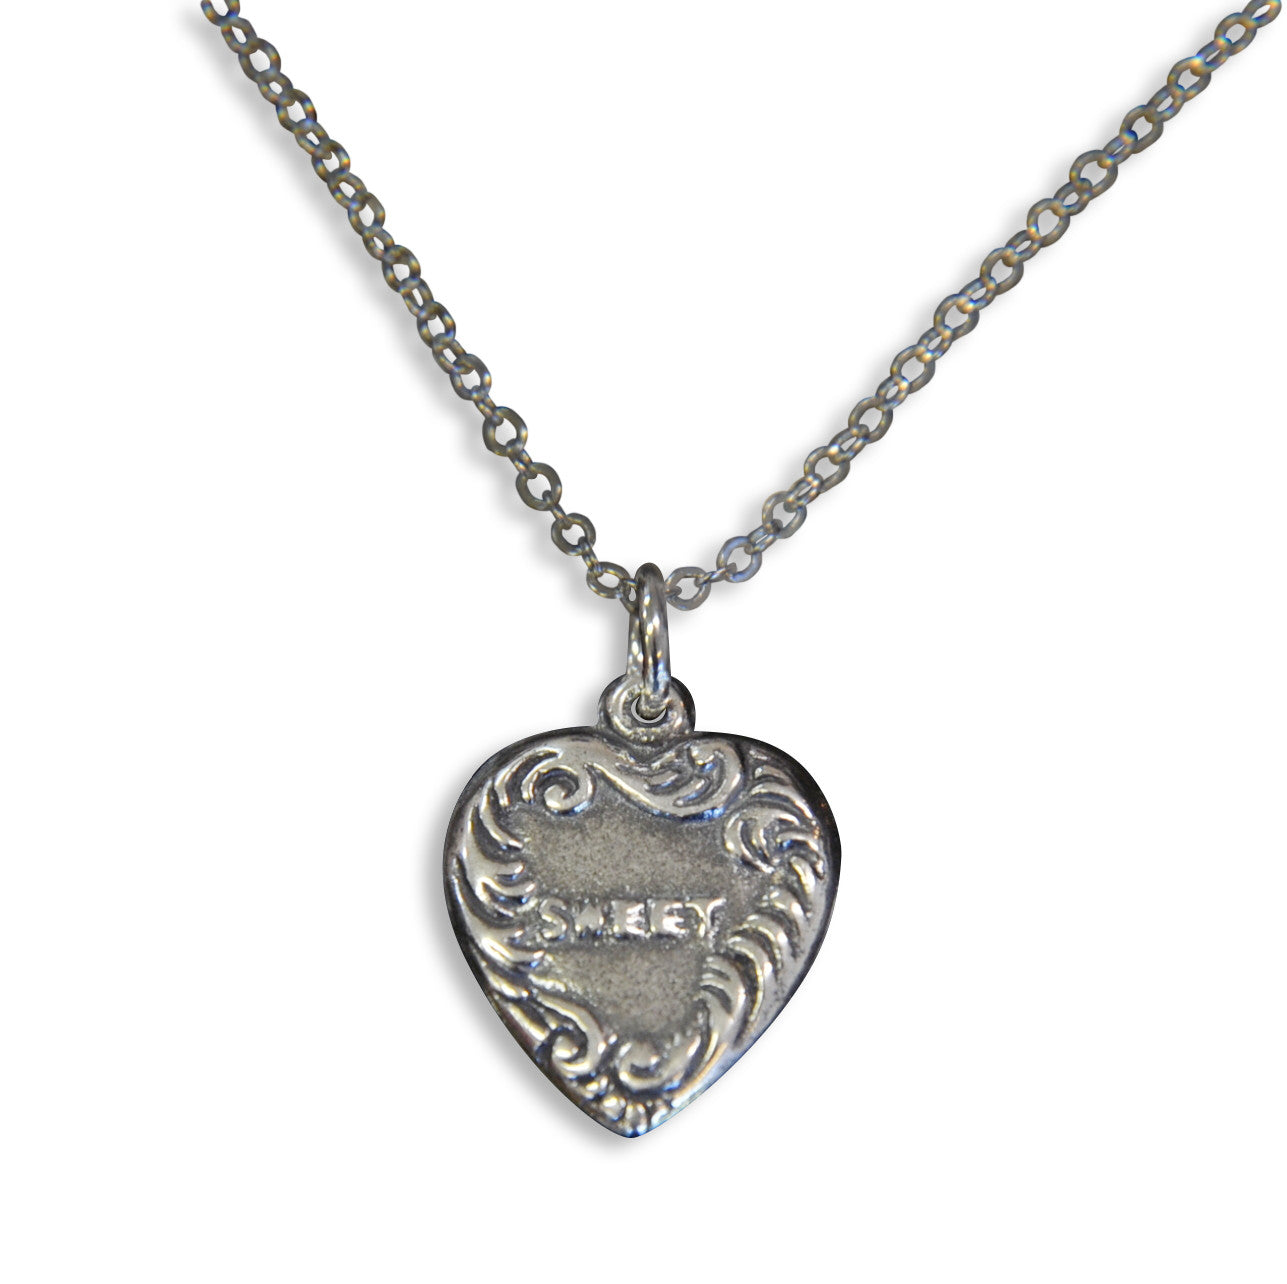 Vintage Sweet Heart Necklace Heart Charm Silver Vintage Charm - Gwen Delicious Jewelry Designs